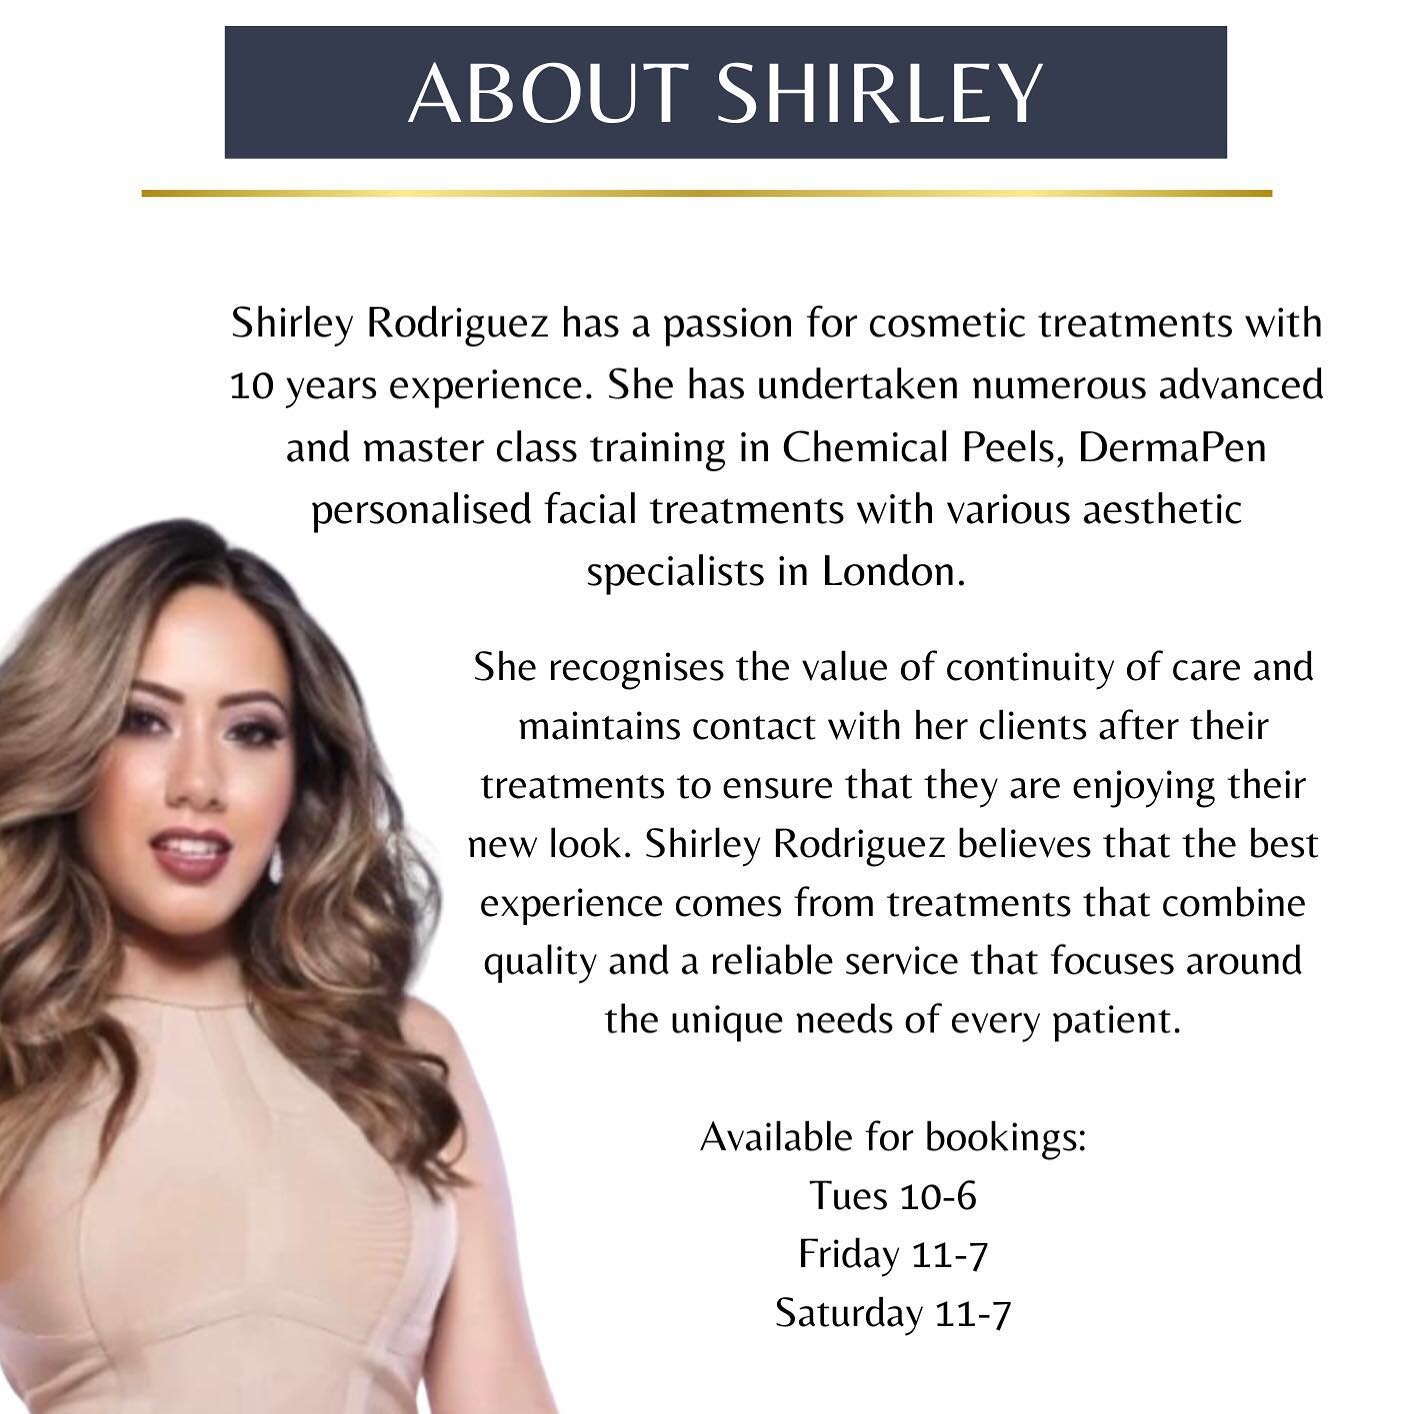 Shirley Rodriguez has a passion for cosmetic treatments with 10 years experience. She has undertaken numerous advanced and master class training in Chemical Peels, DermaPen personalised facial treatments with various aesthetic specialists in London.
